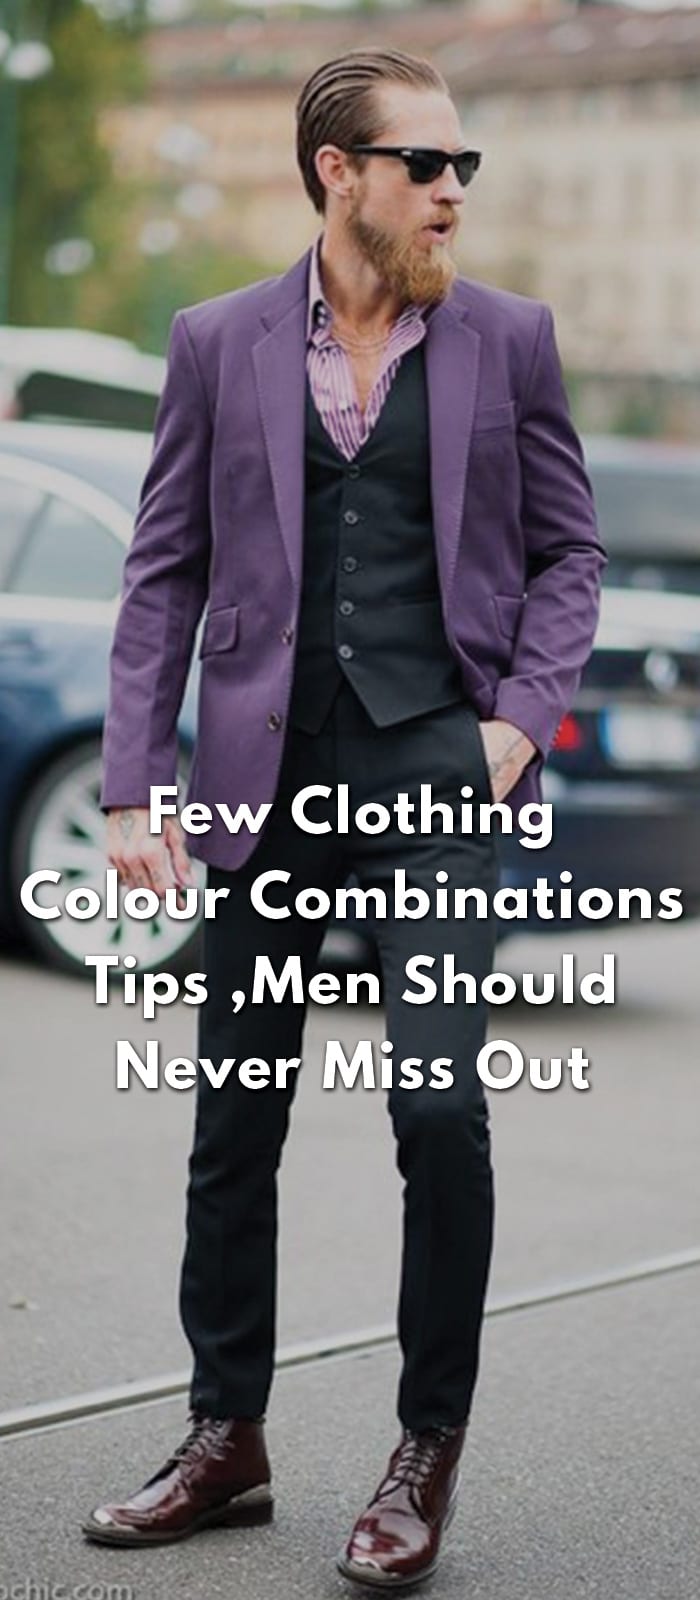 Few-Clothing-Colour-Combinations-Tips-Men-Should-Never-Miss-Out